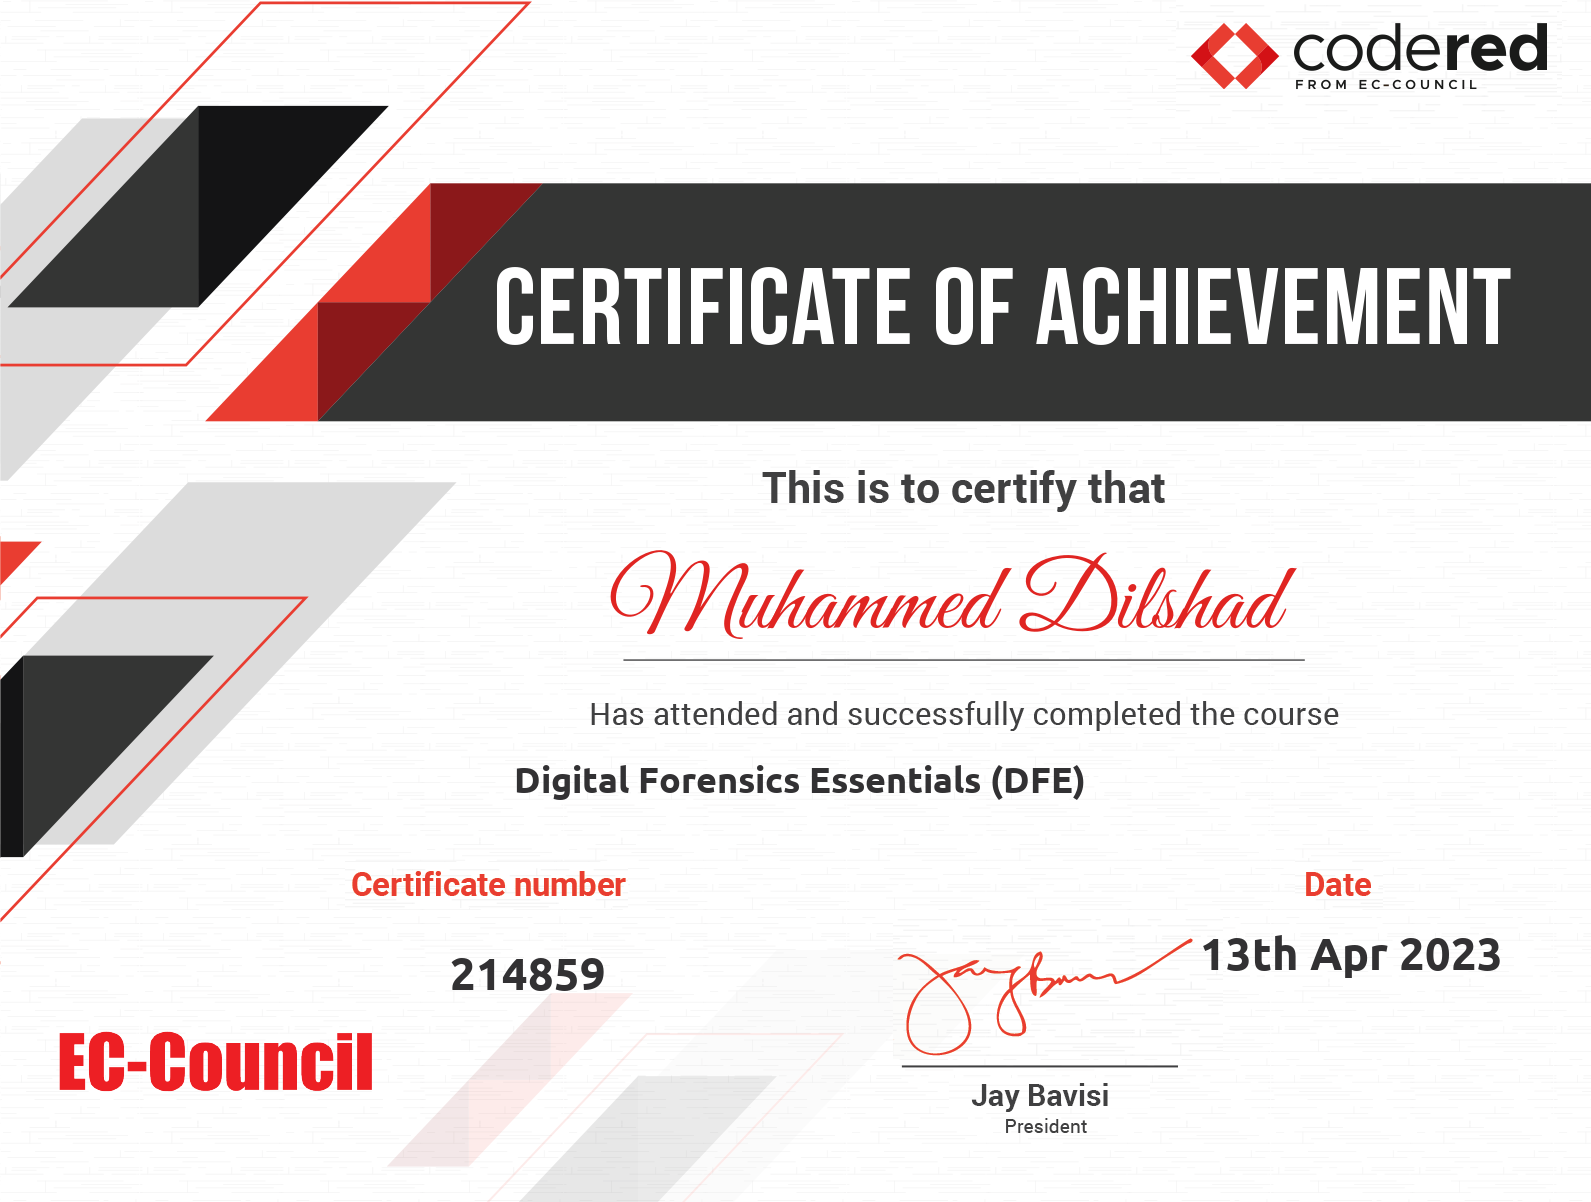 couNciL

> CERTIFICATE OF ACHIEVEMENT

This is to certify that

# O)Nlitemmed Dilstad

Has attended and successfully completed the course
Digital Forensics Essentials (DFE)
Certificate number Date

214859 SE Apr 2023

Jay Bavisi

President